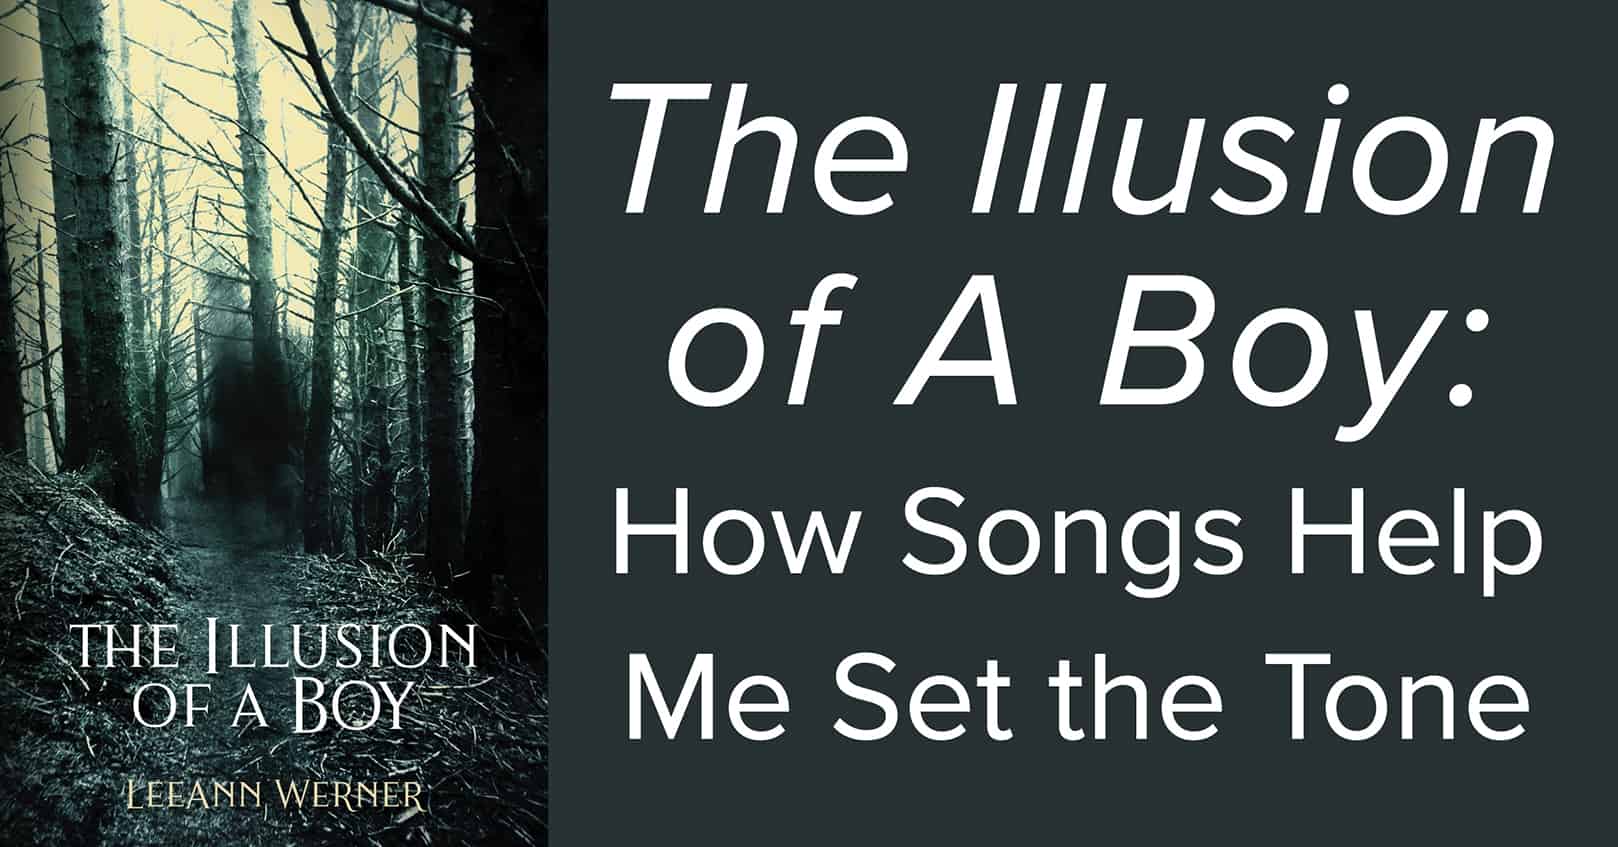 Illusions of a boy - songs in books